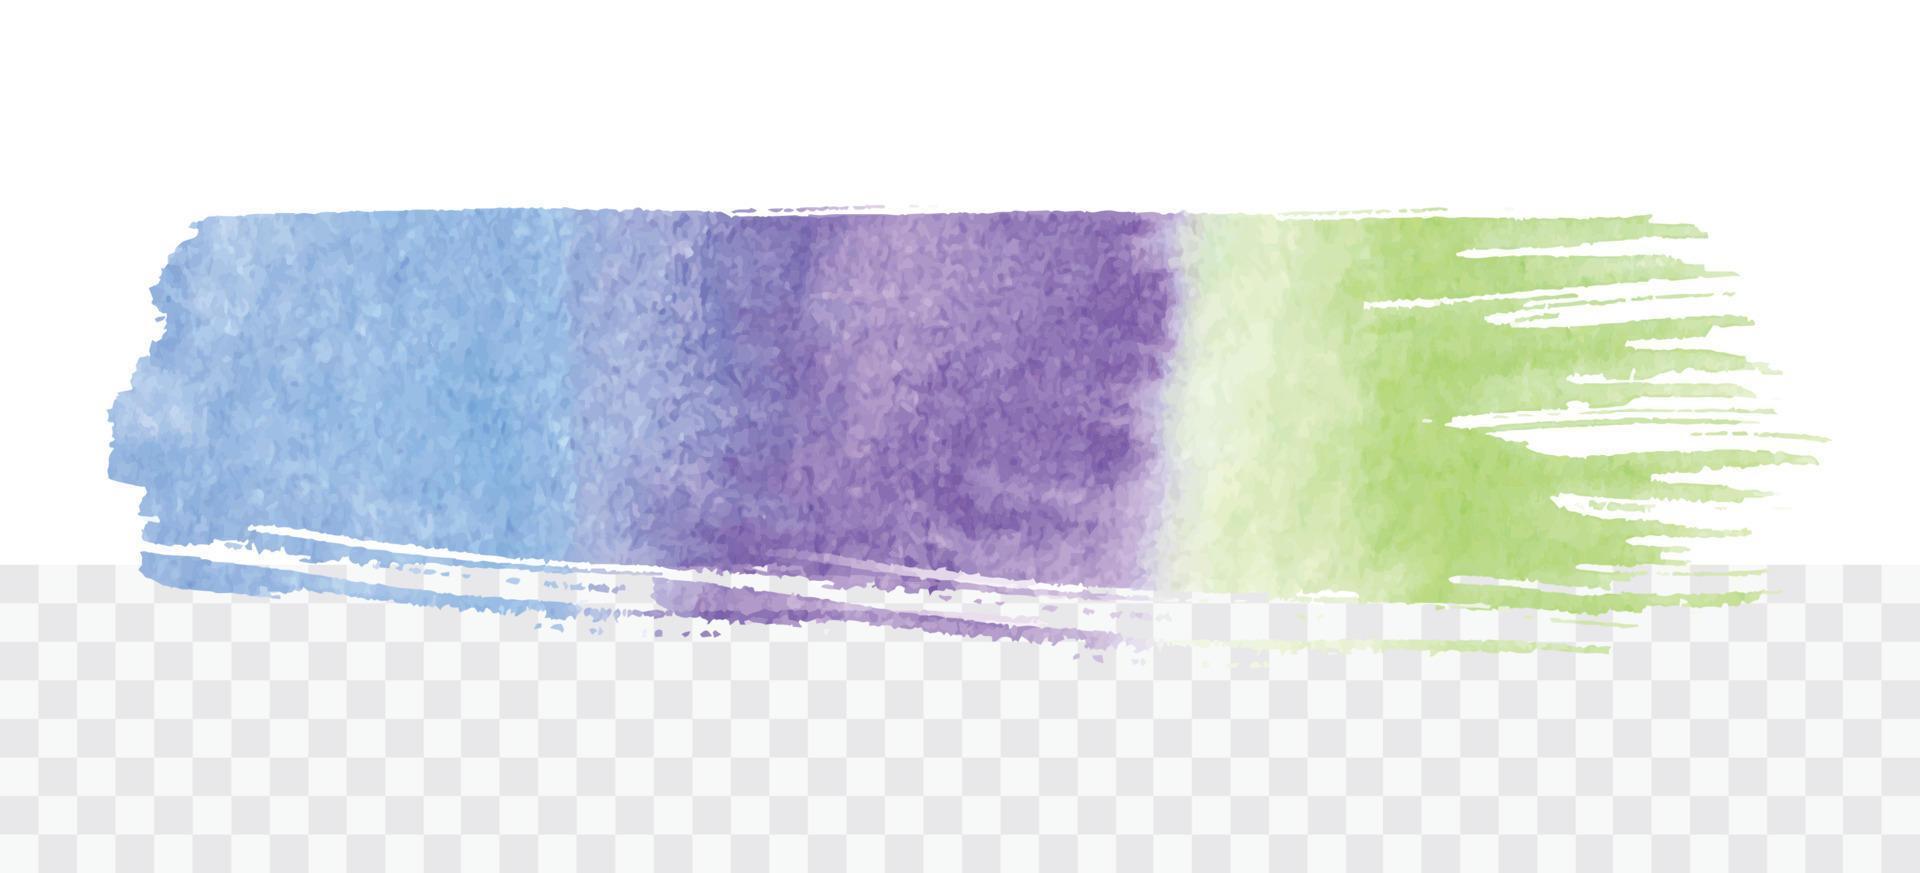 Colorful gradient watercolor brush stroke. Vector hand painted background for design